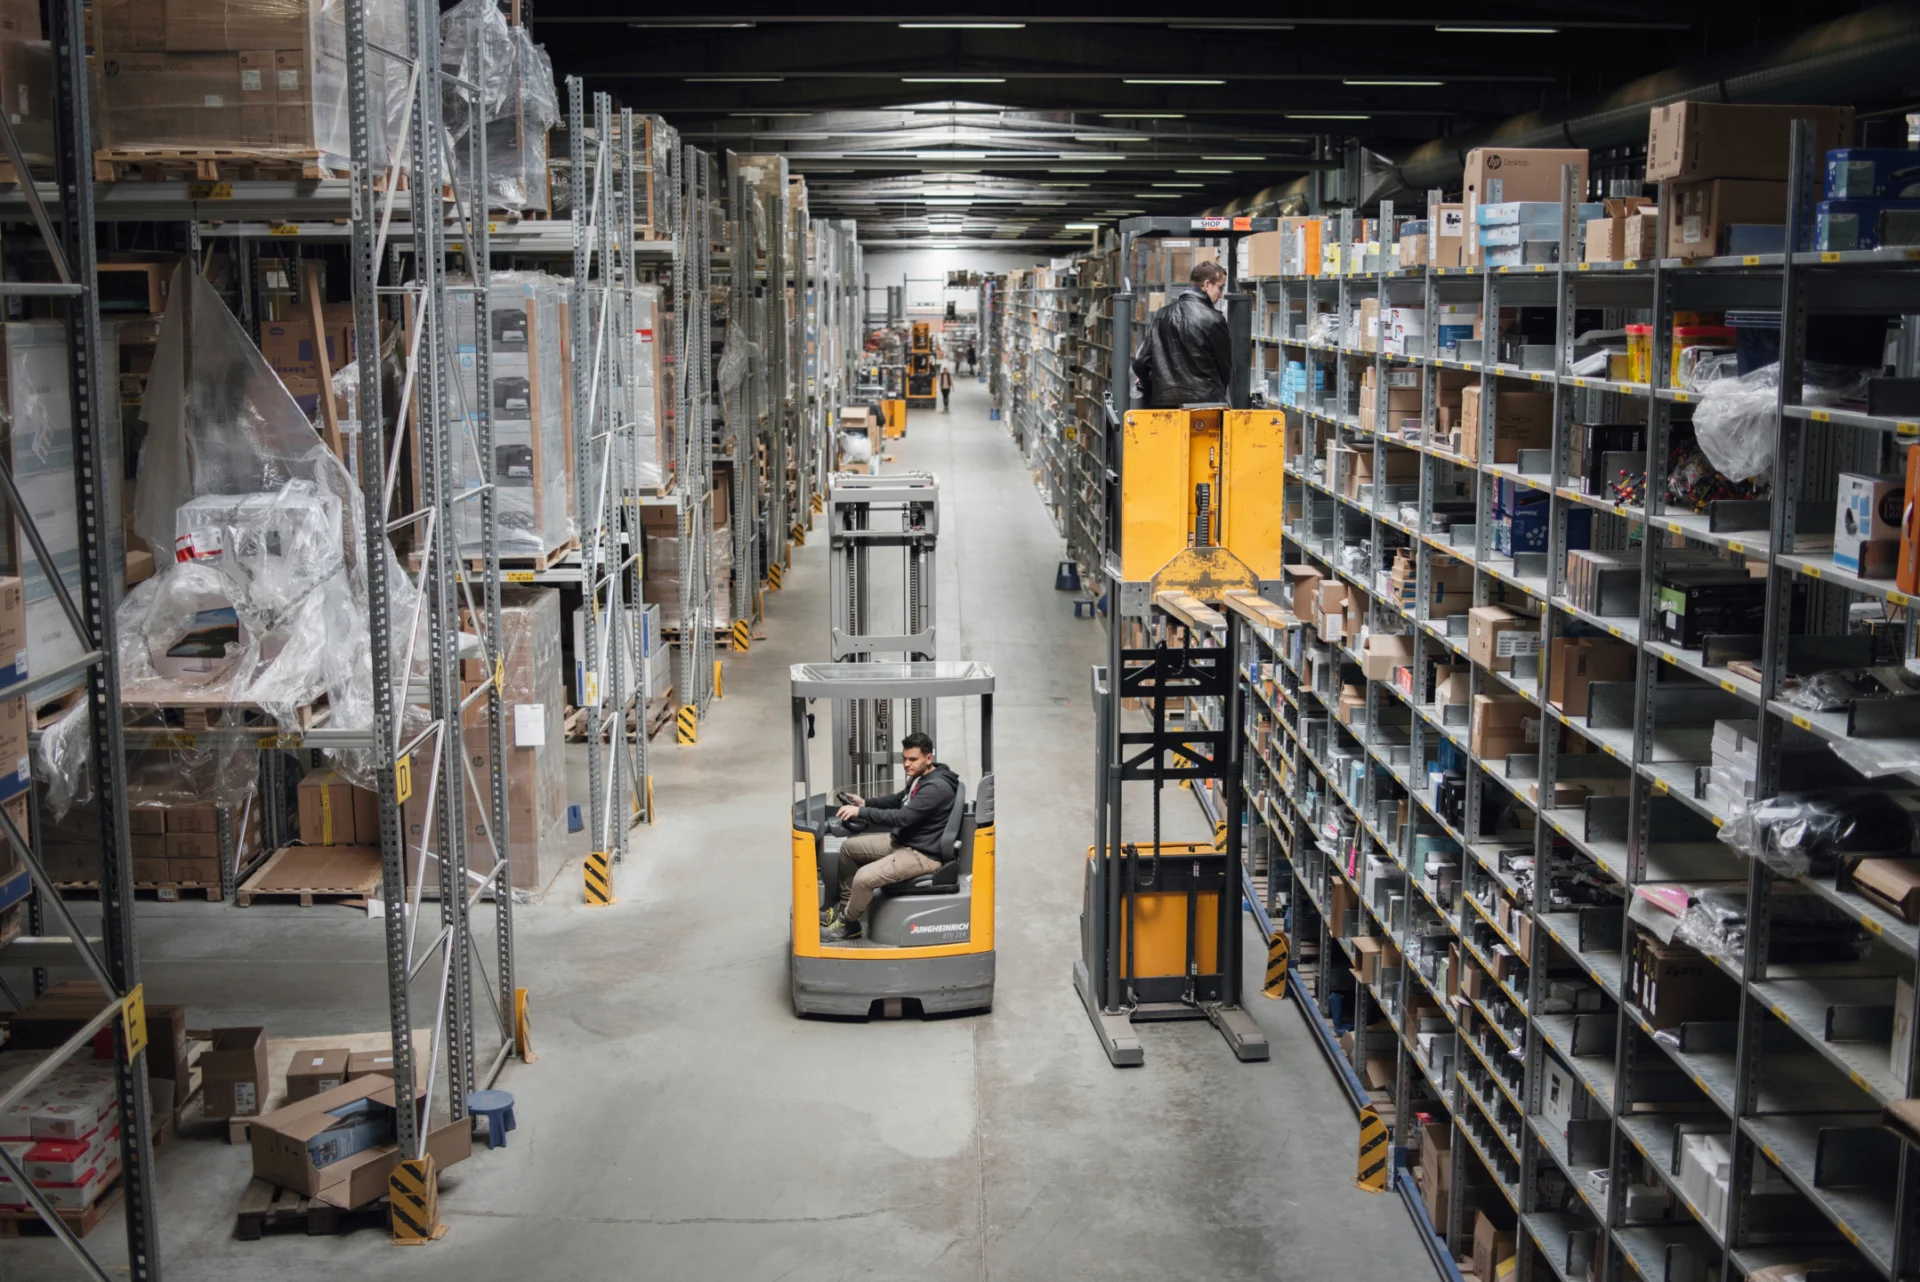 A large warehouse with storage racks up to the ceiling; in the middle, a forklift